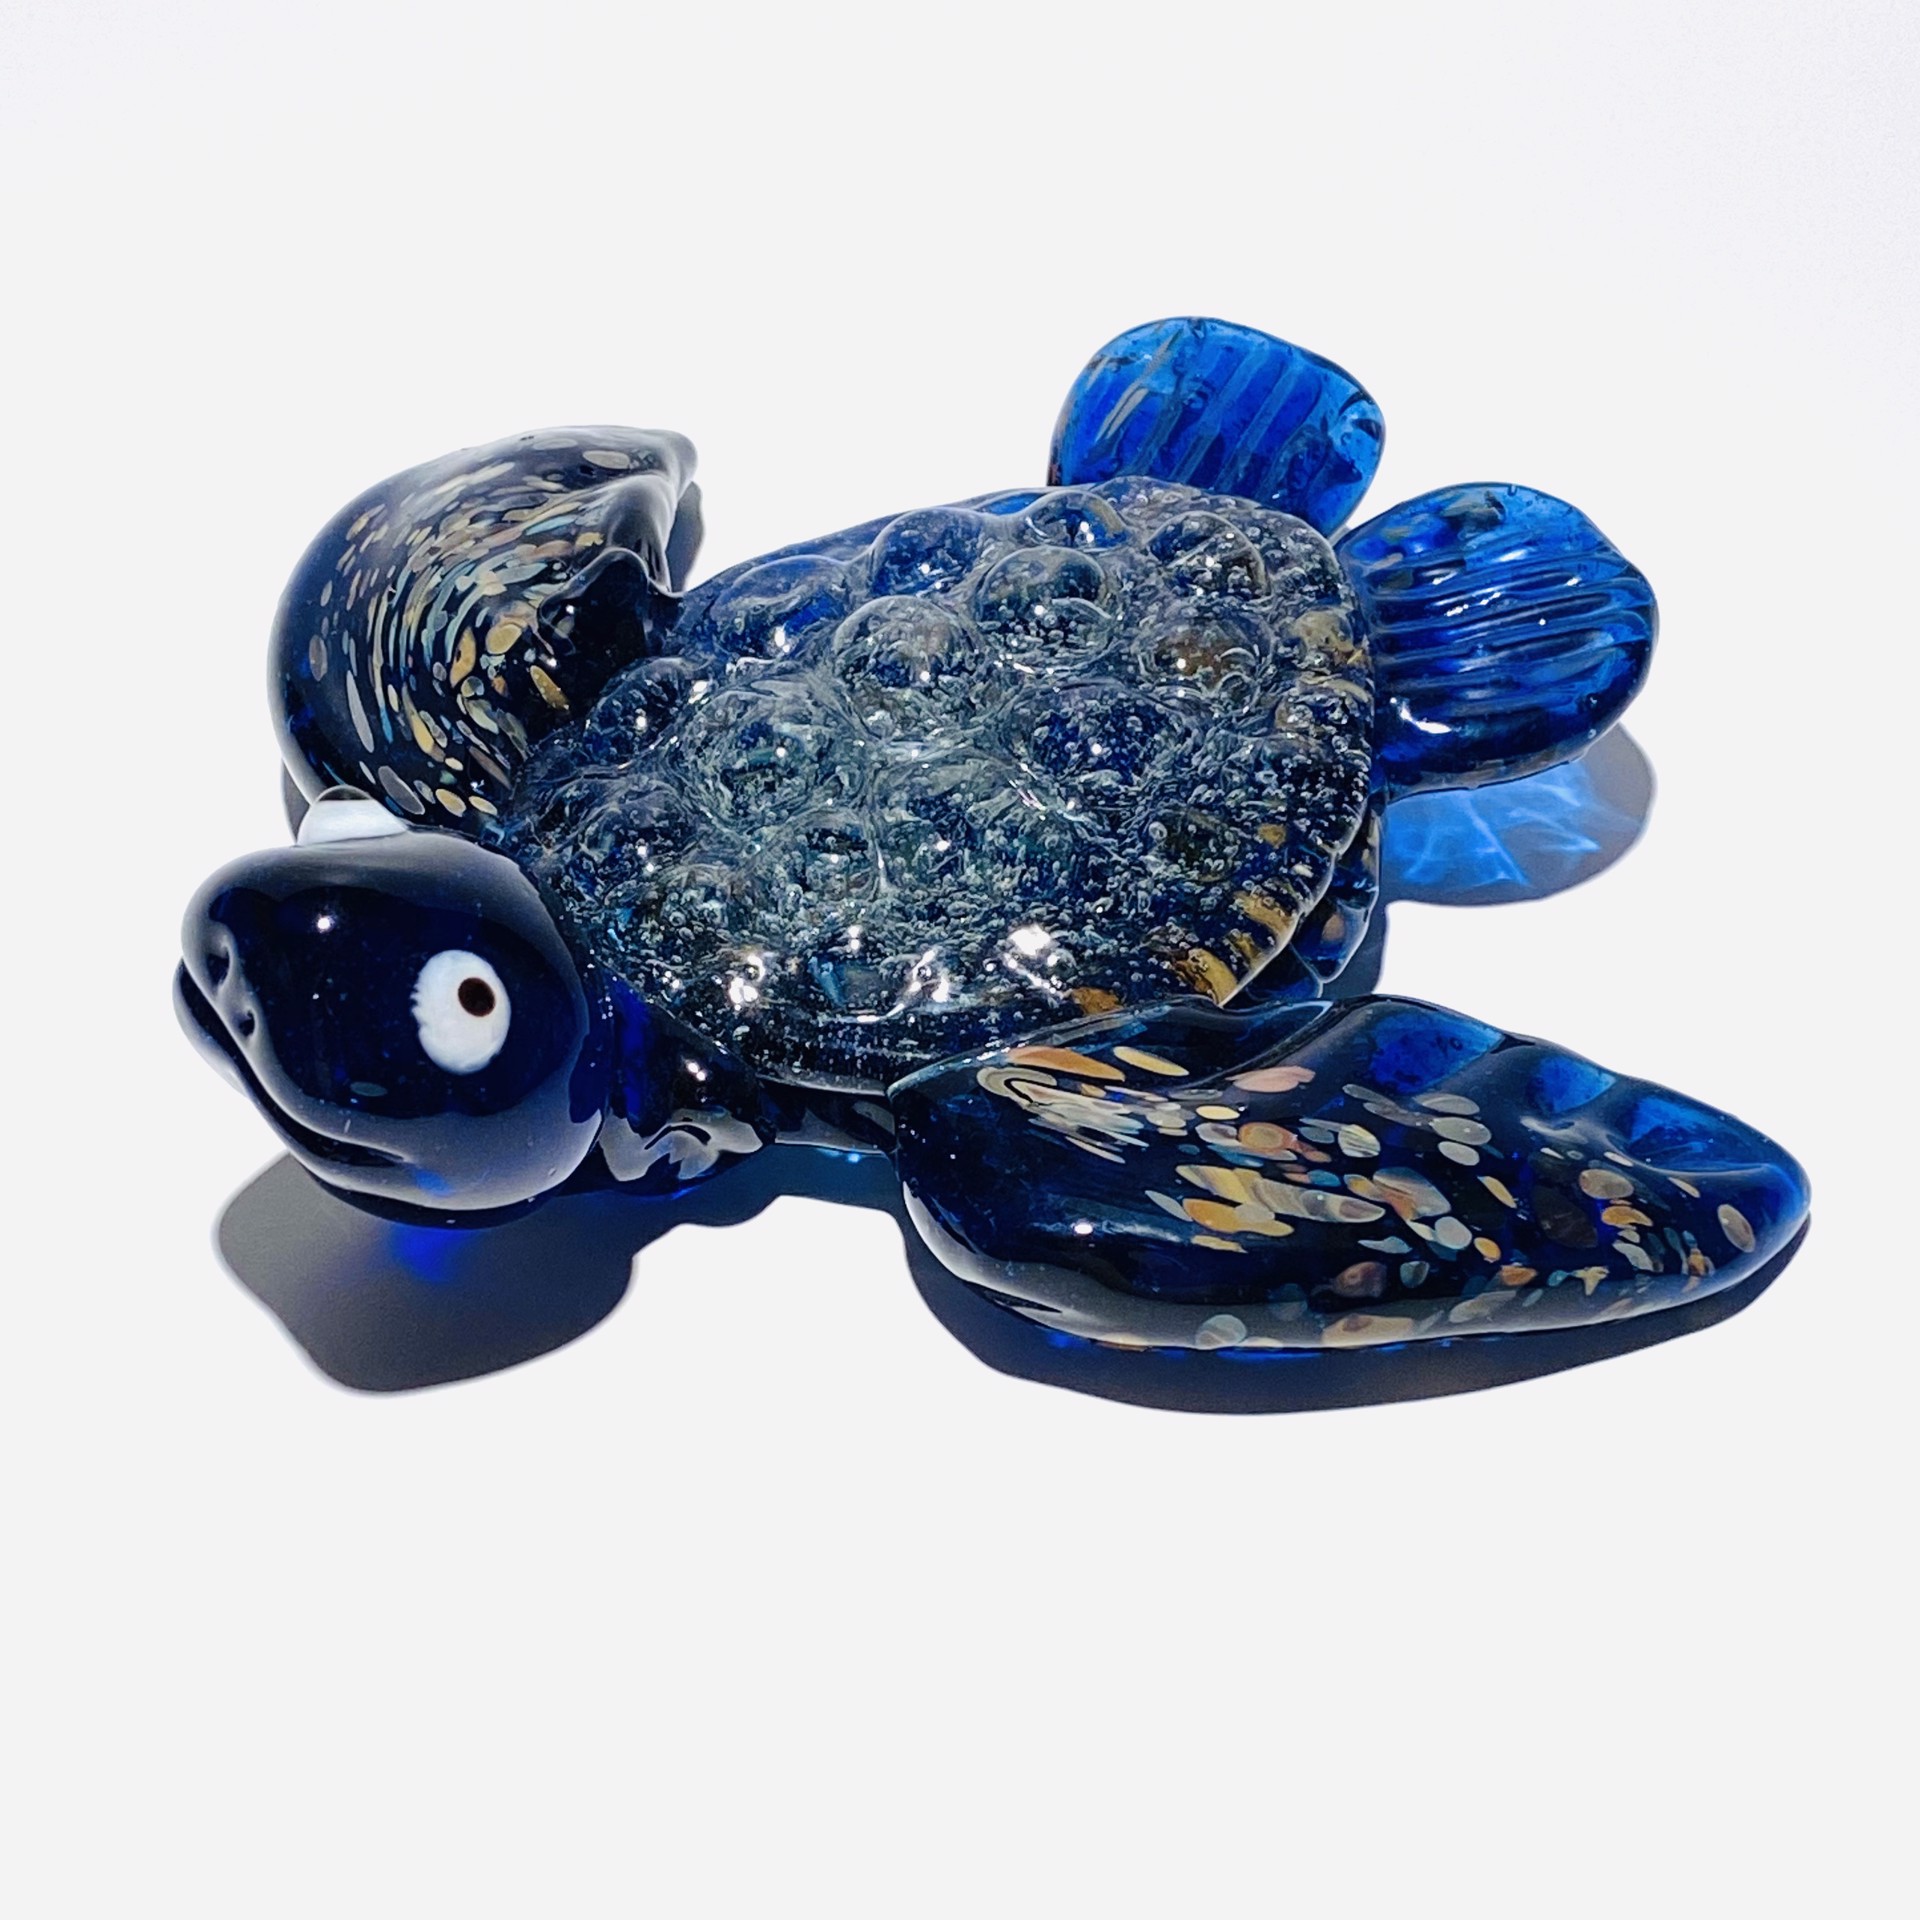 Turtle-Bubbles And Blue, JG4 by John Glass